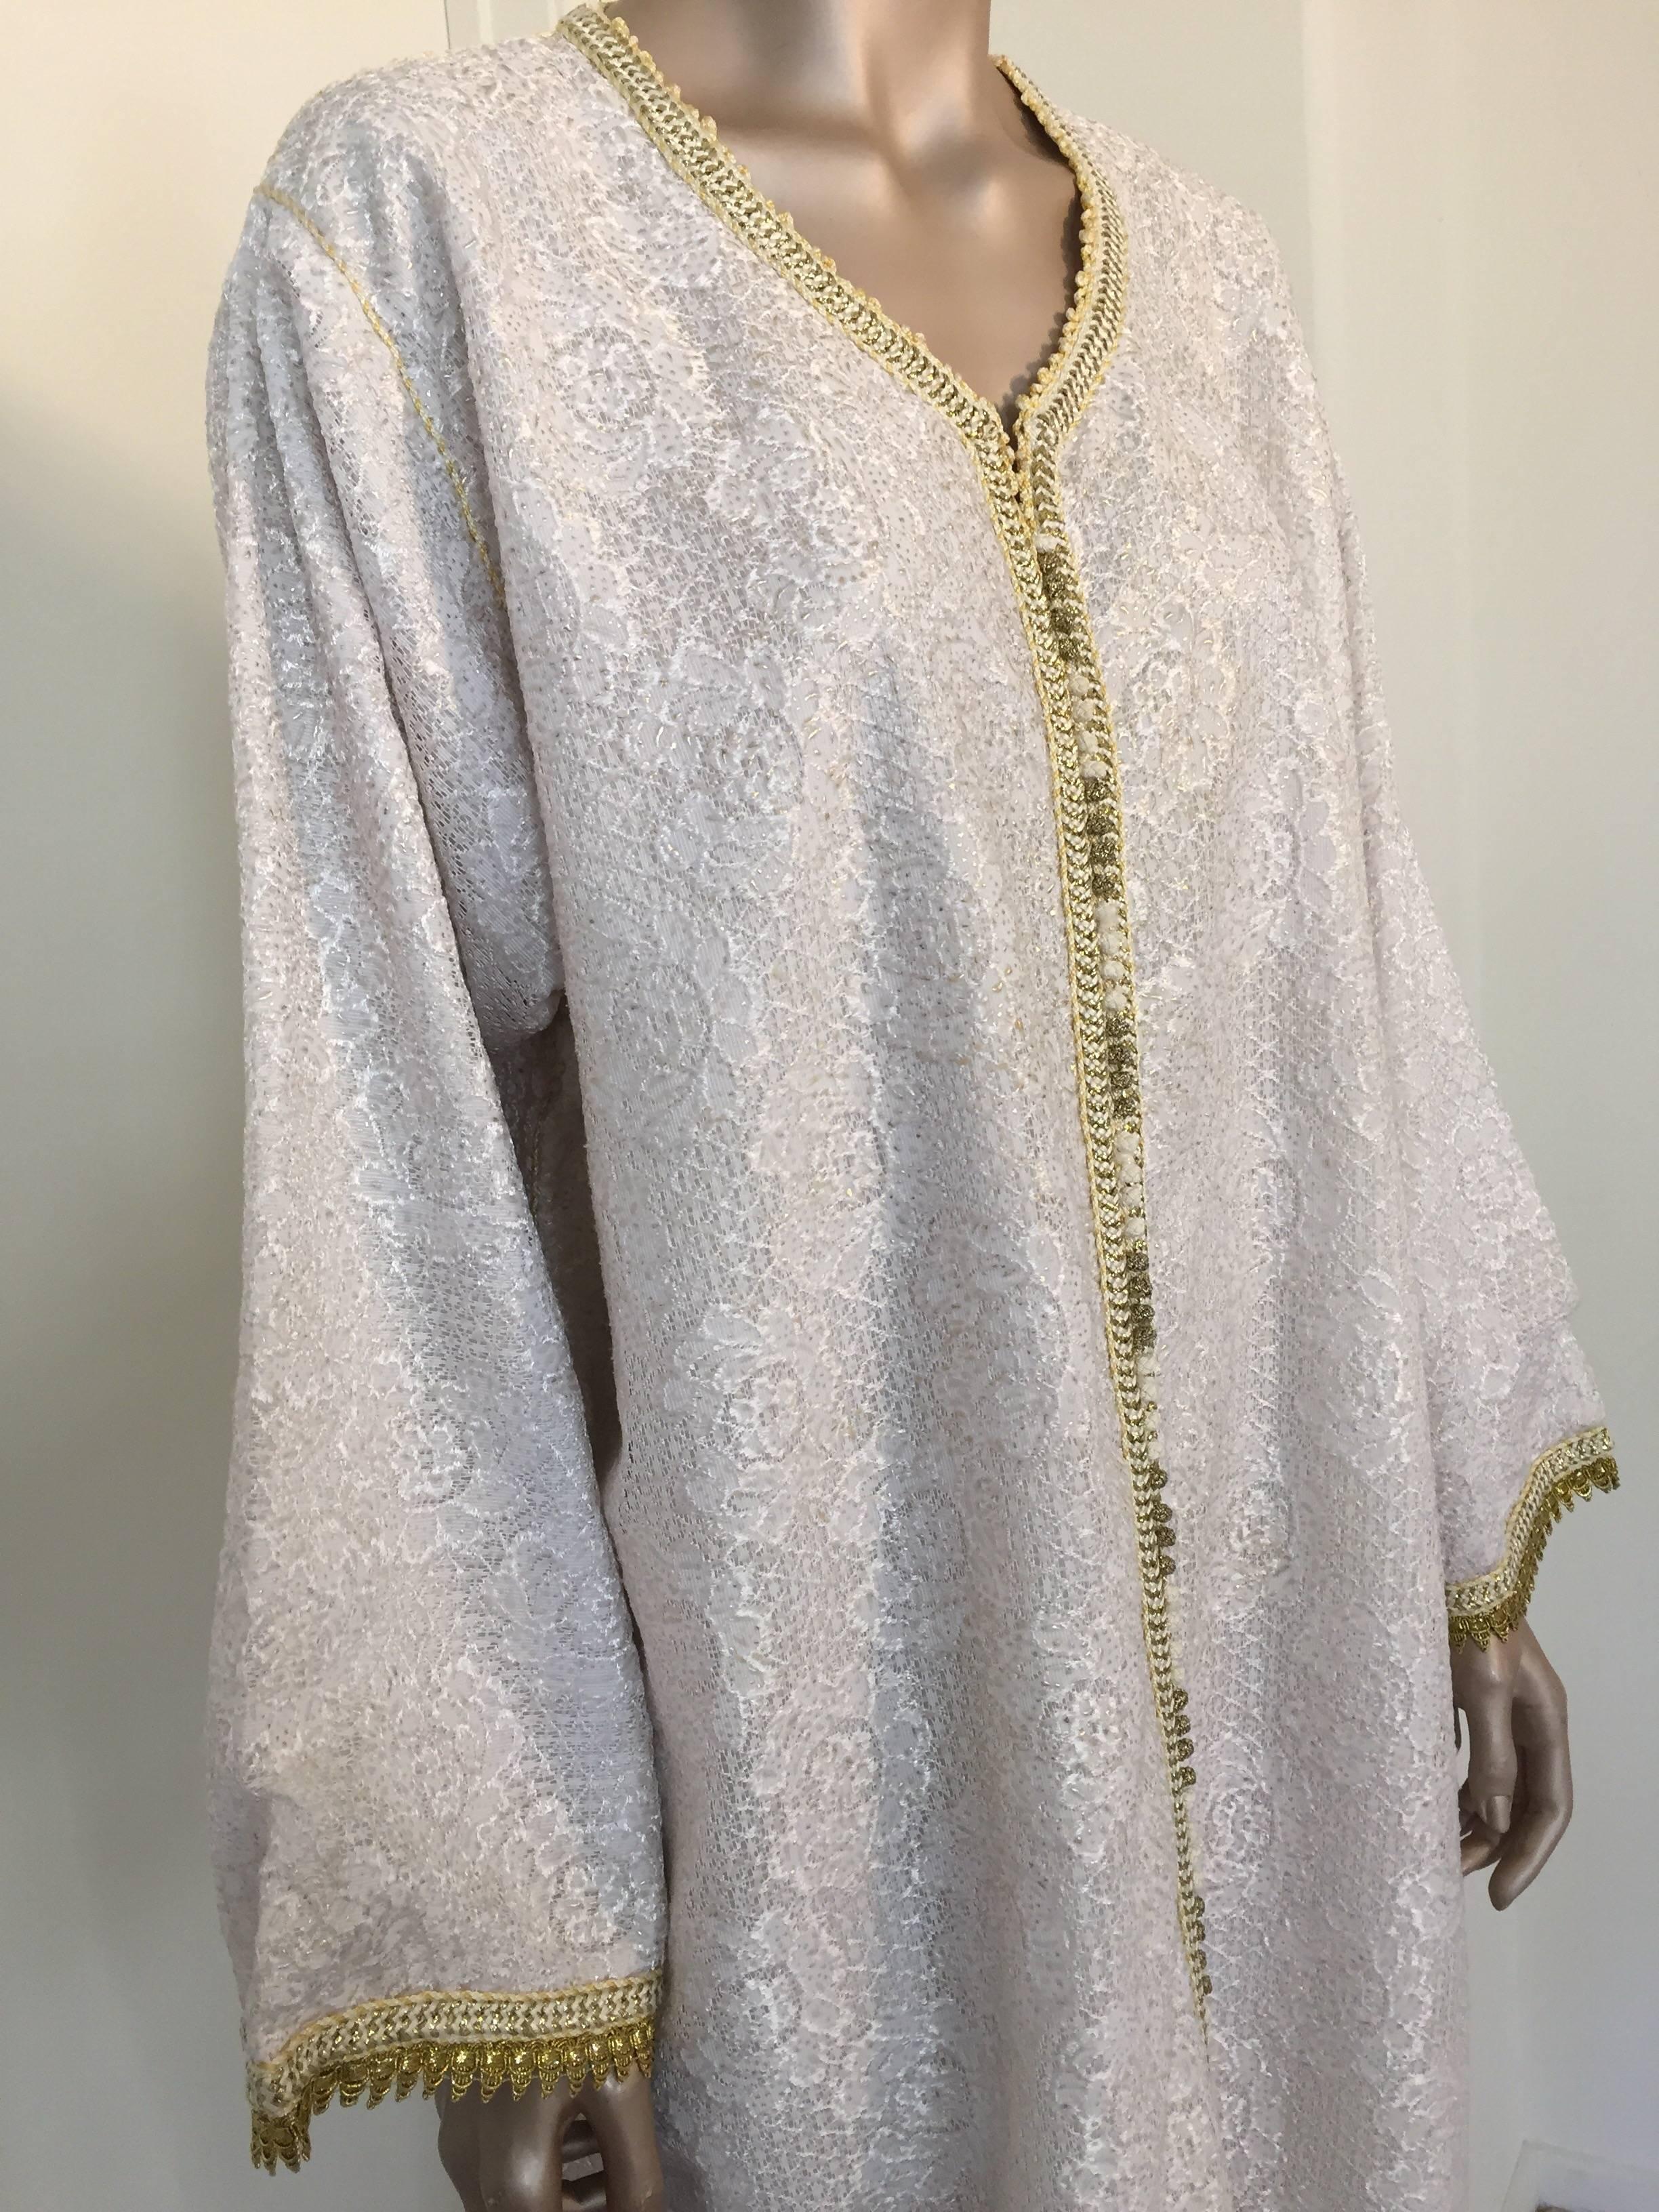 Moroccan Vintage Caftan in White and Gold Lace 1970s Kaftan Maxi Dress Large In Good Condition For Sale In North Hollywood, CA